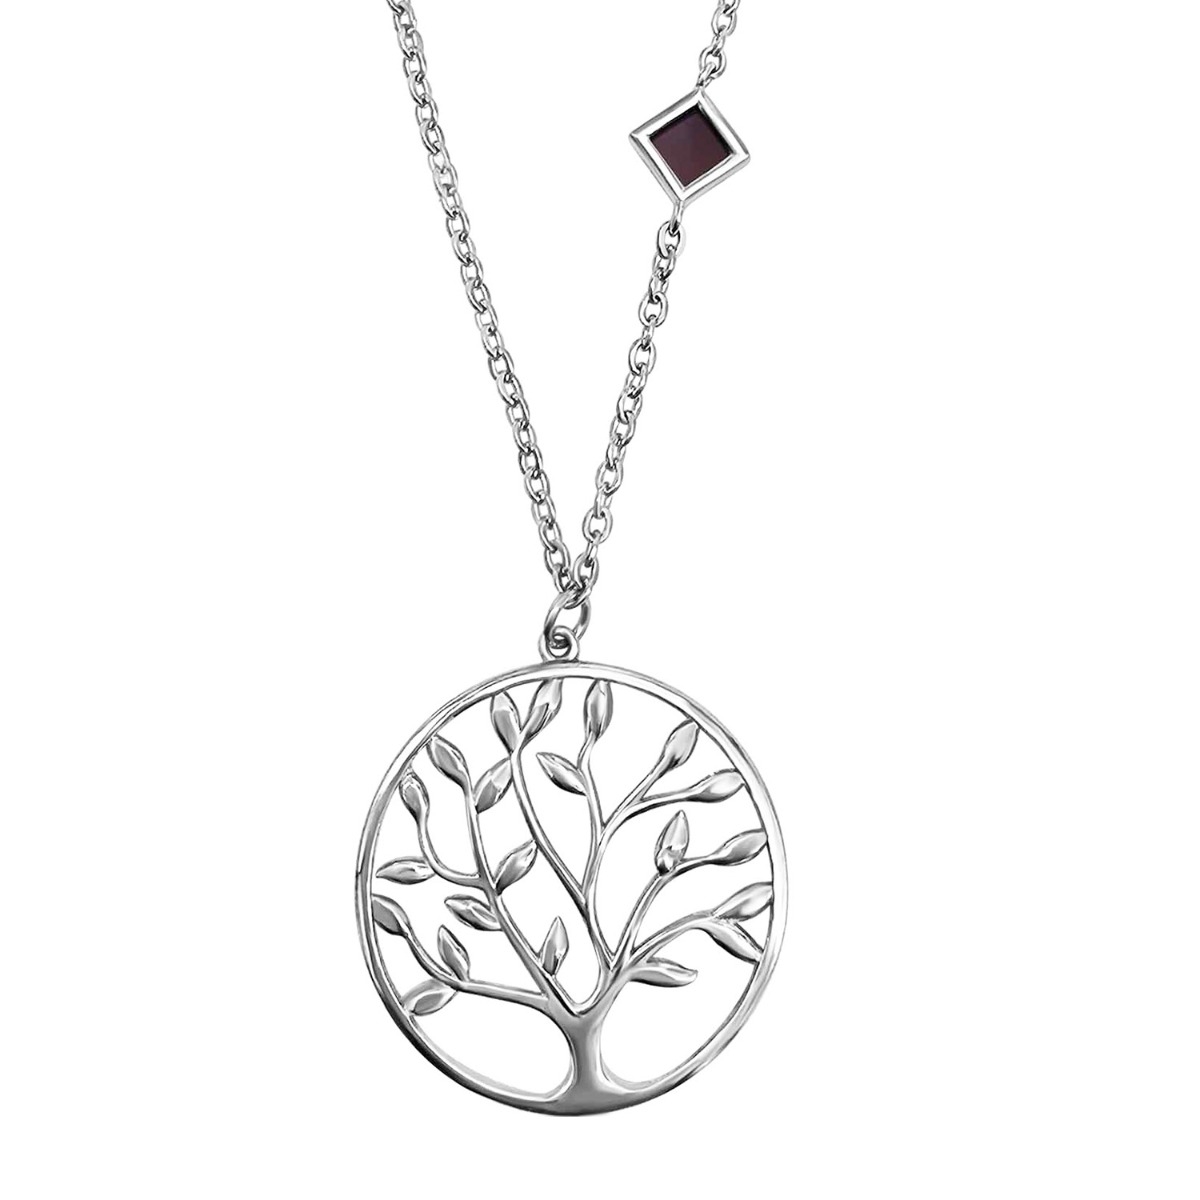 Round Tree of Life Necklace with Micro-Inscribed Bible Chip - Silver or Gold-Plated - 1